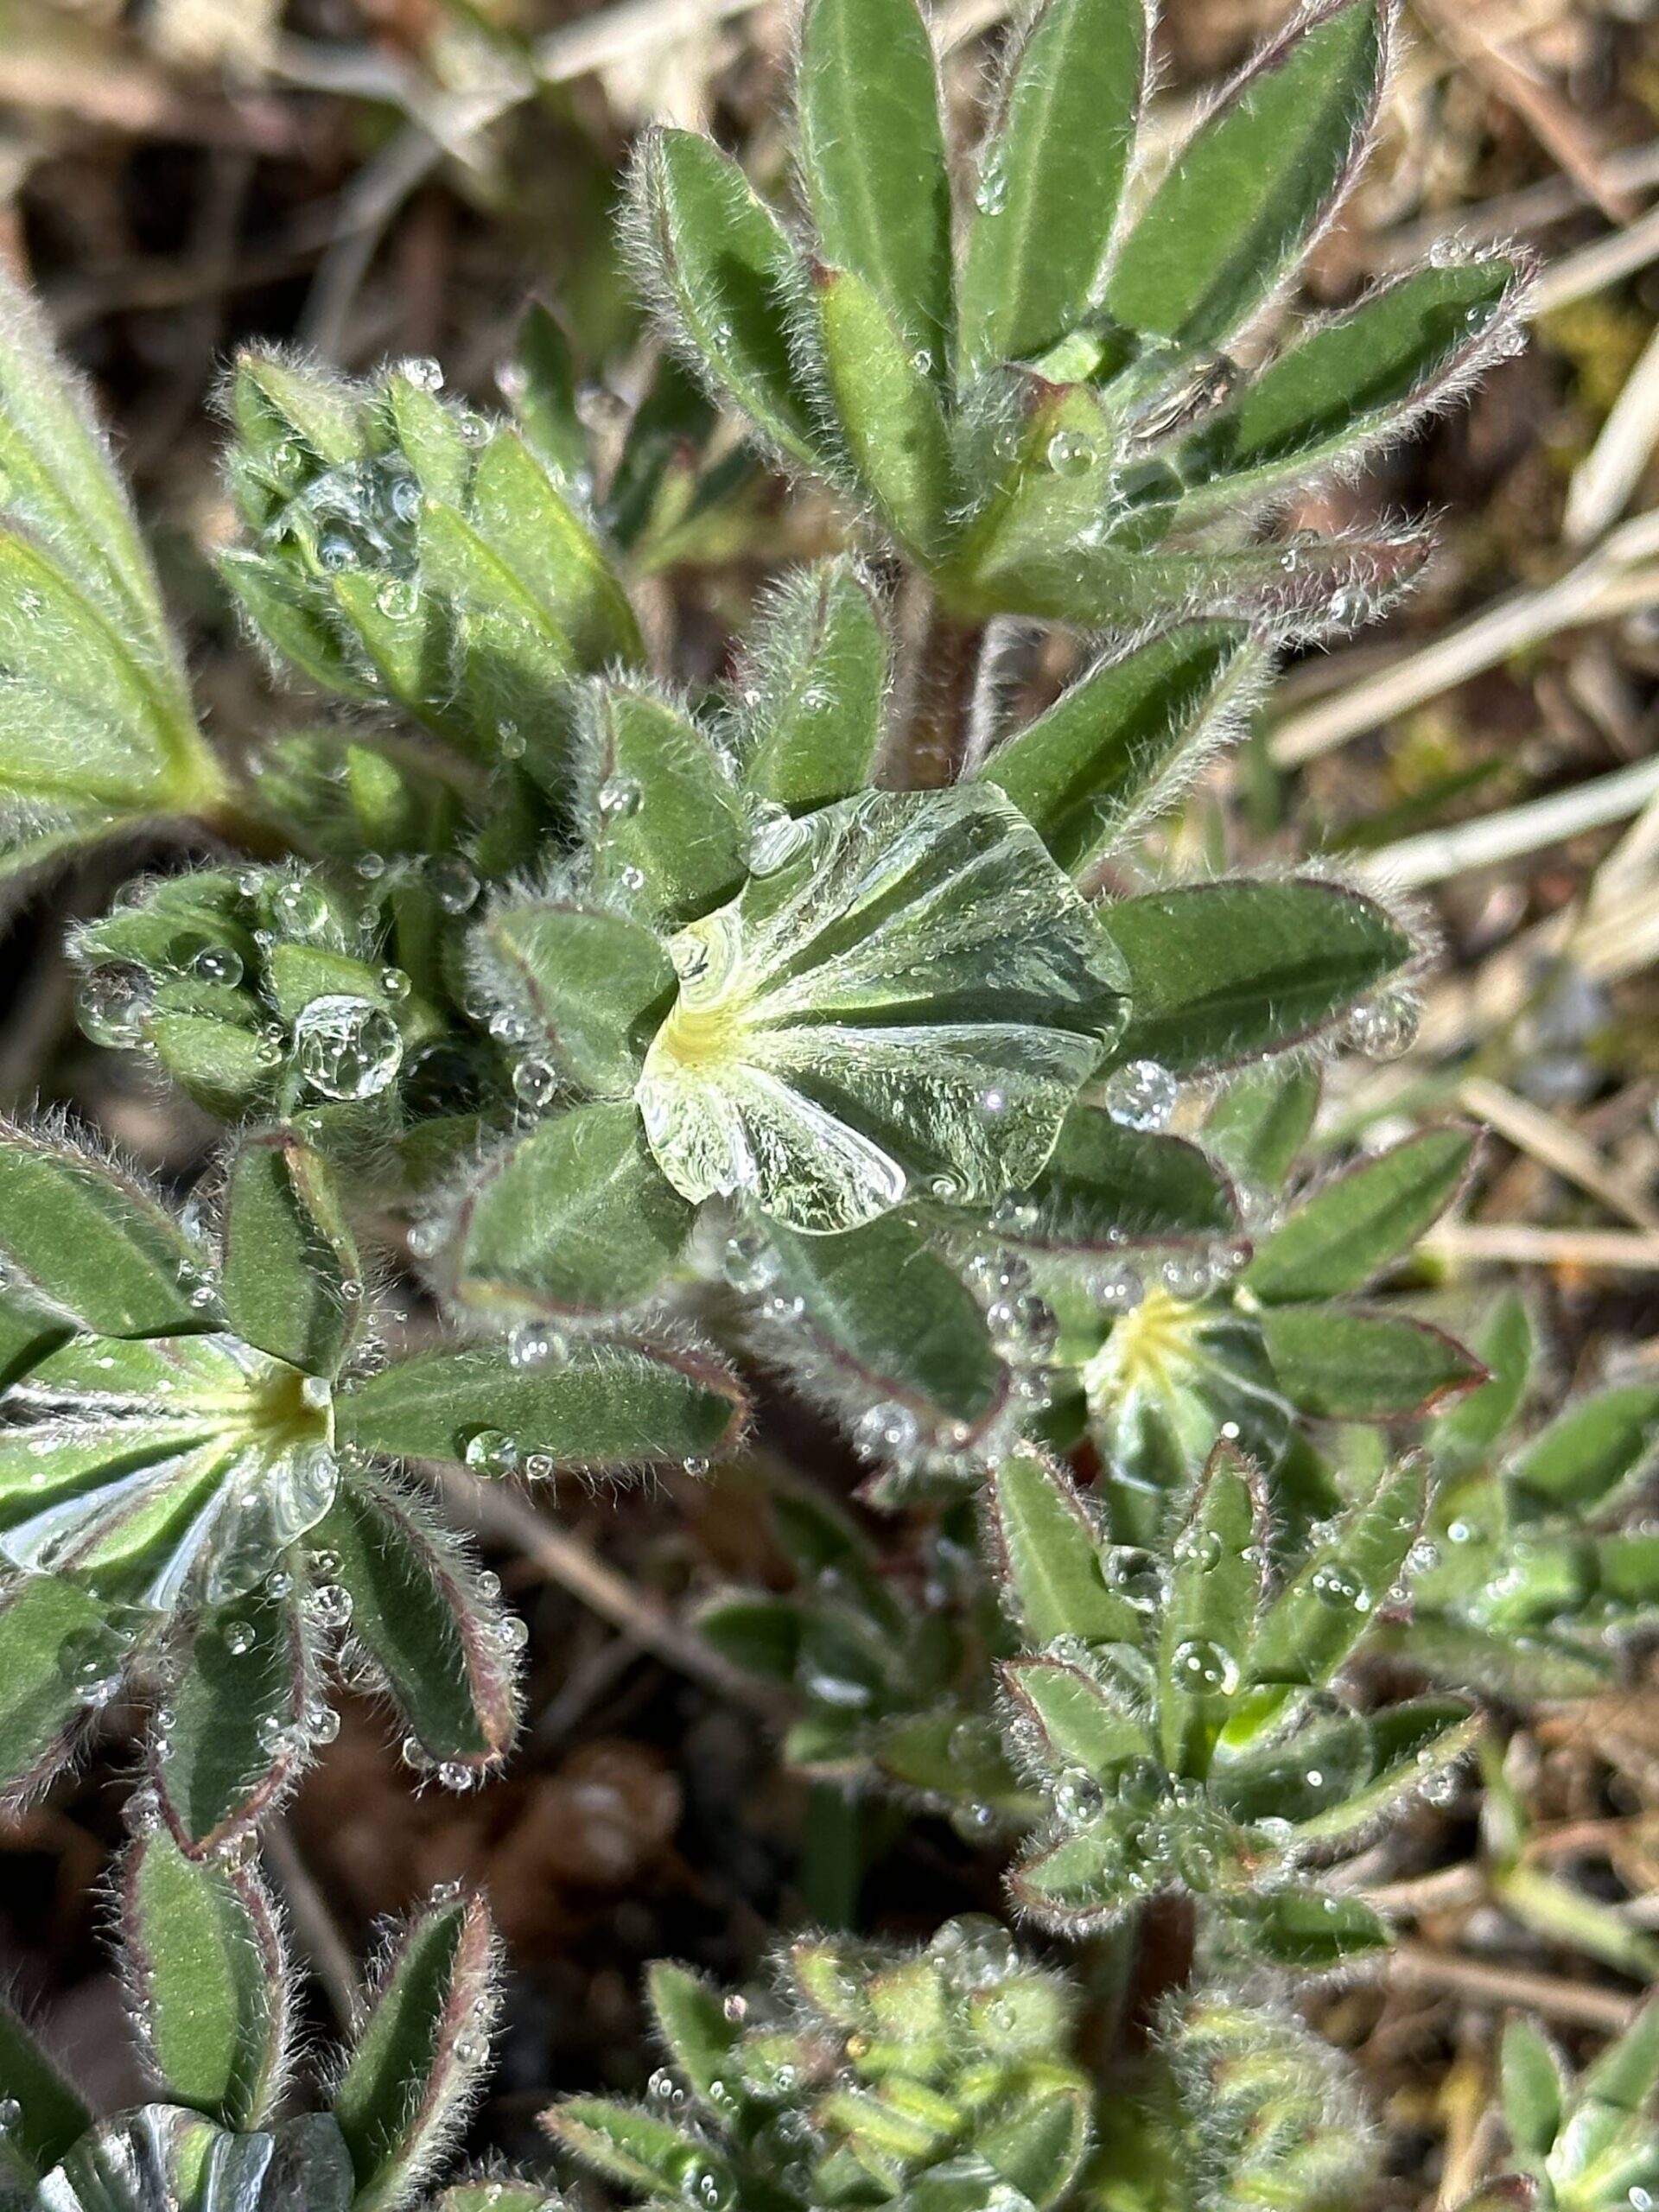 Dew drops cling to lupine along the Point Bridget Trail. (Courtesy Photo / Deana Barajas)
Dew drops cling to lupine along the Point Bridget Trail. (Courtesy Photo / Deana Barajas)